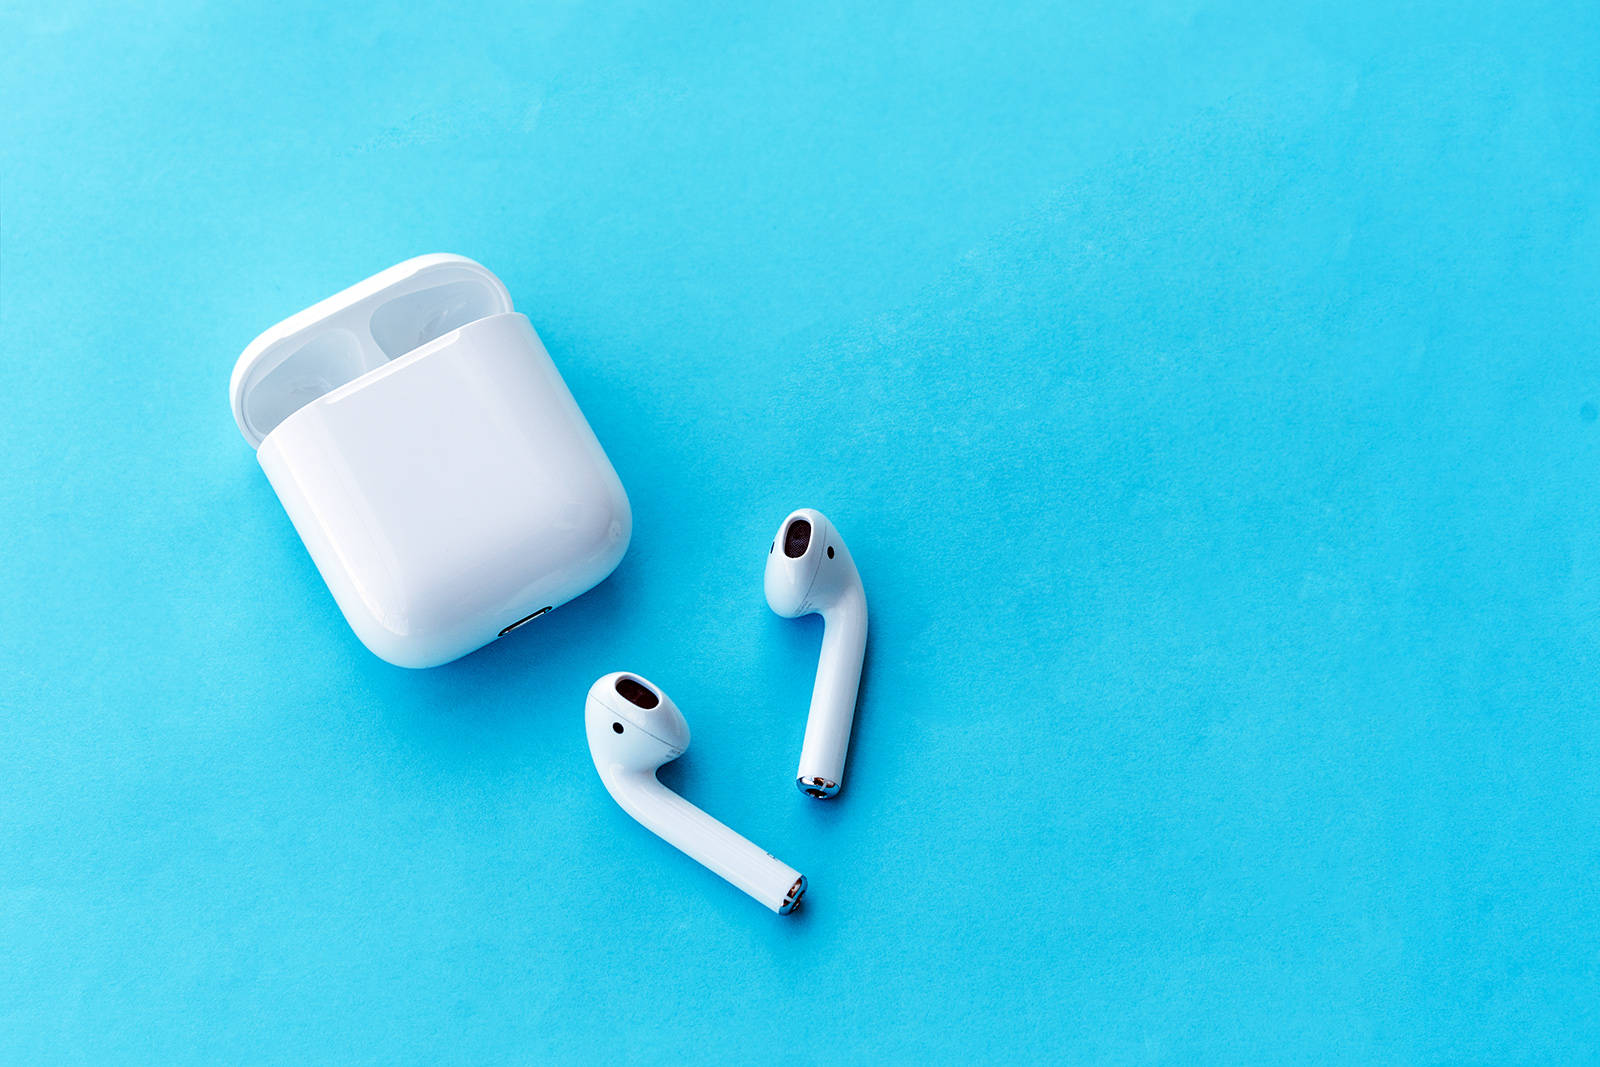 Simple Airpods In Blue Background